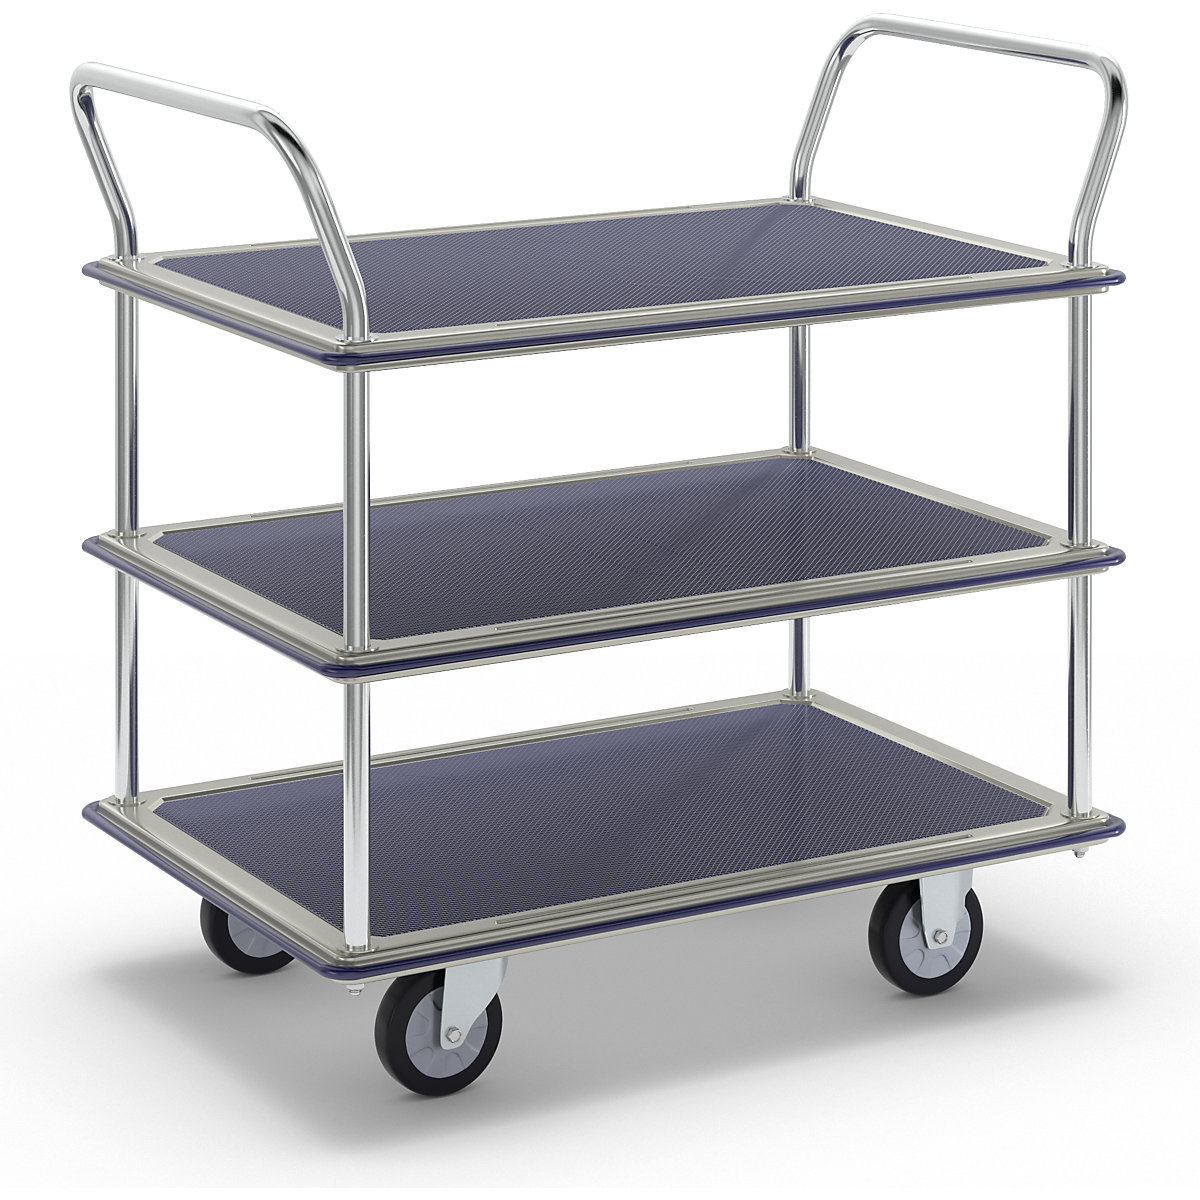 Table trolley chrome plated, 3 shelves with non-slip covering, 2 push handles, max. load 250 kg-11